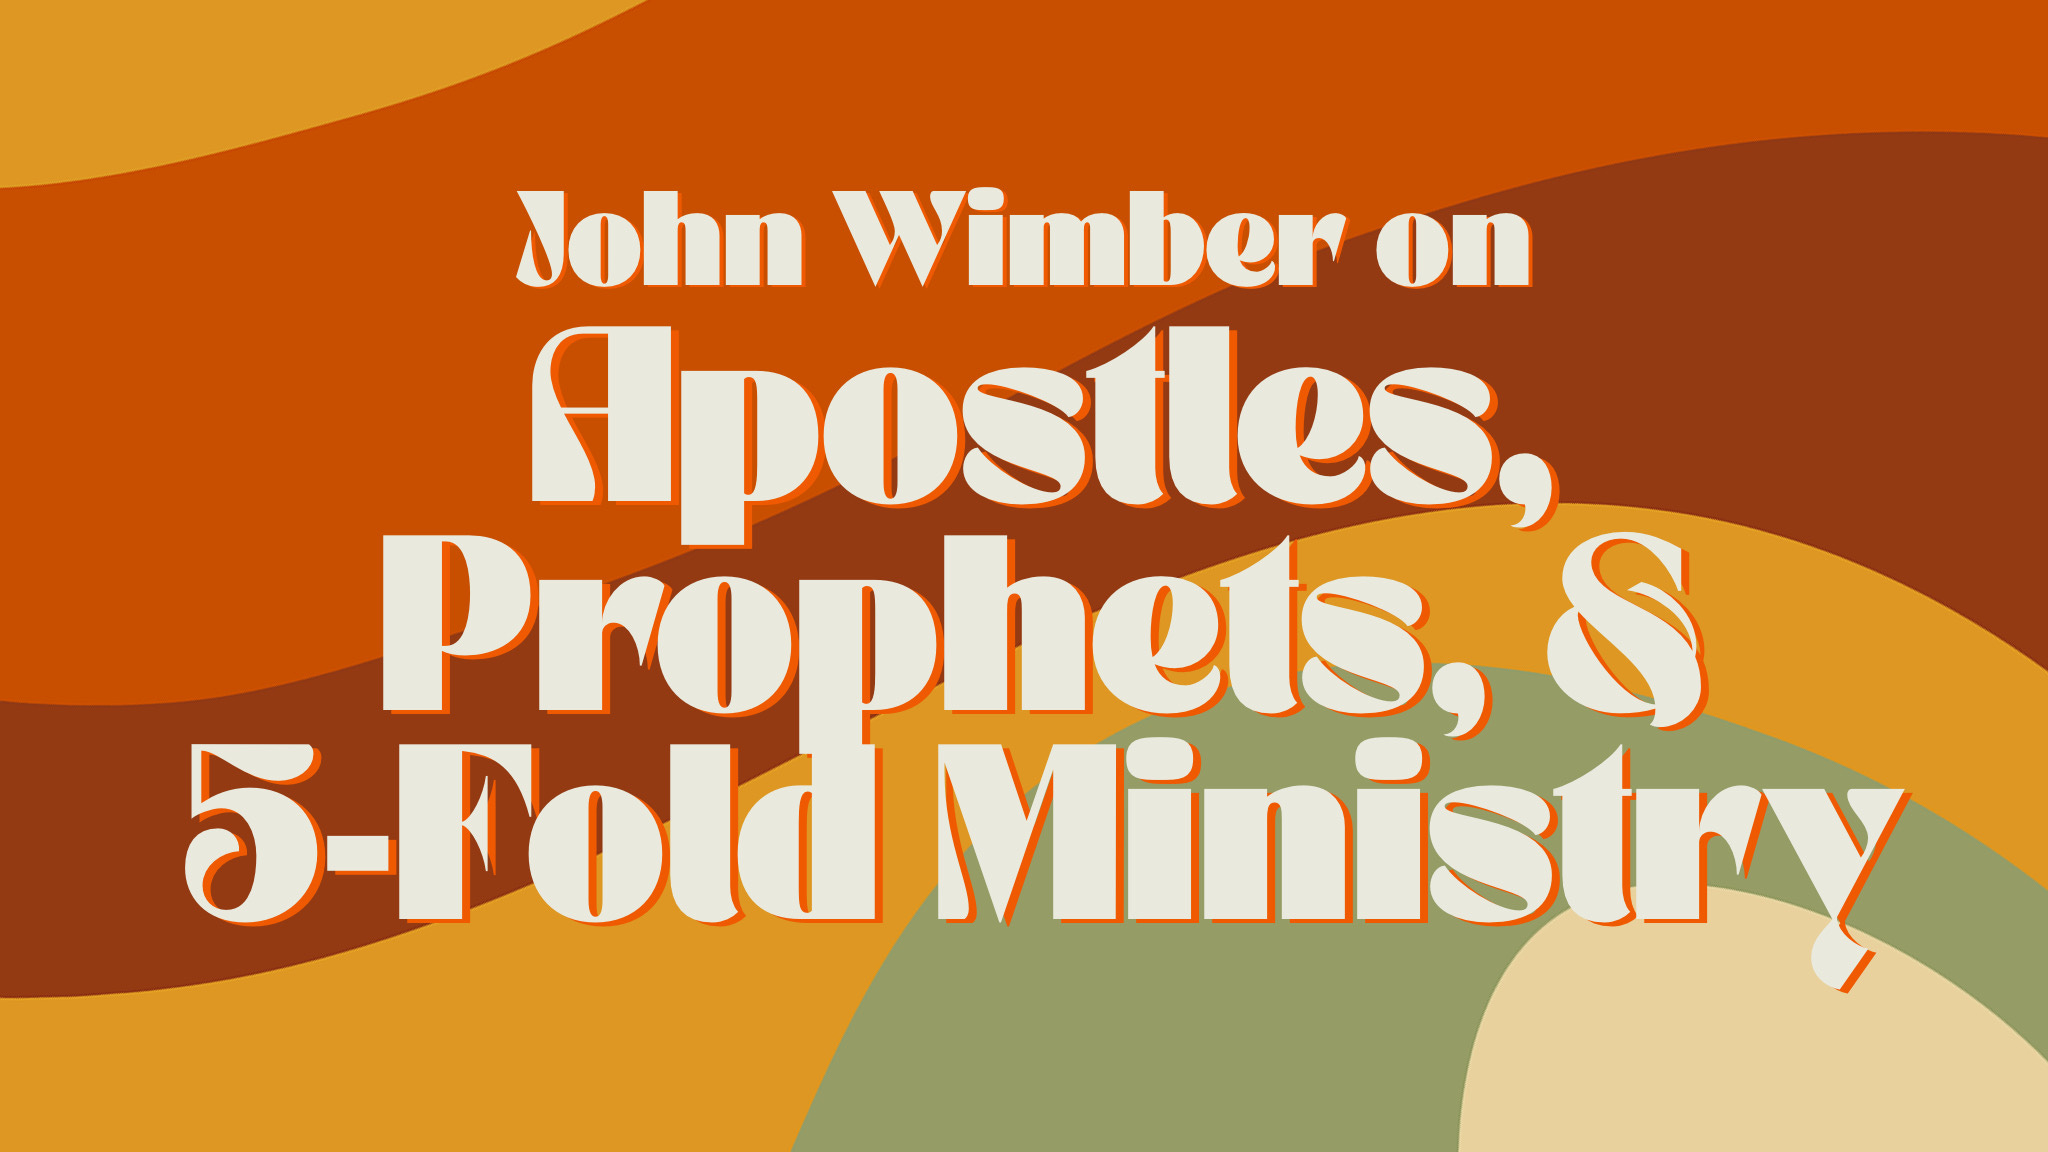 John Wimber on Apostles, Prophets, & the Five-Fold Ministry